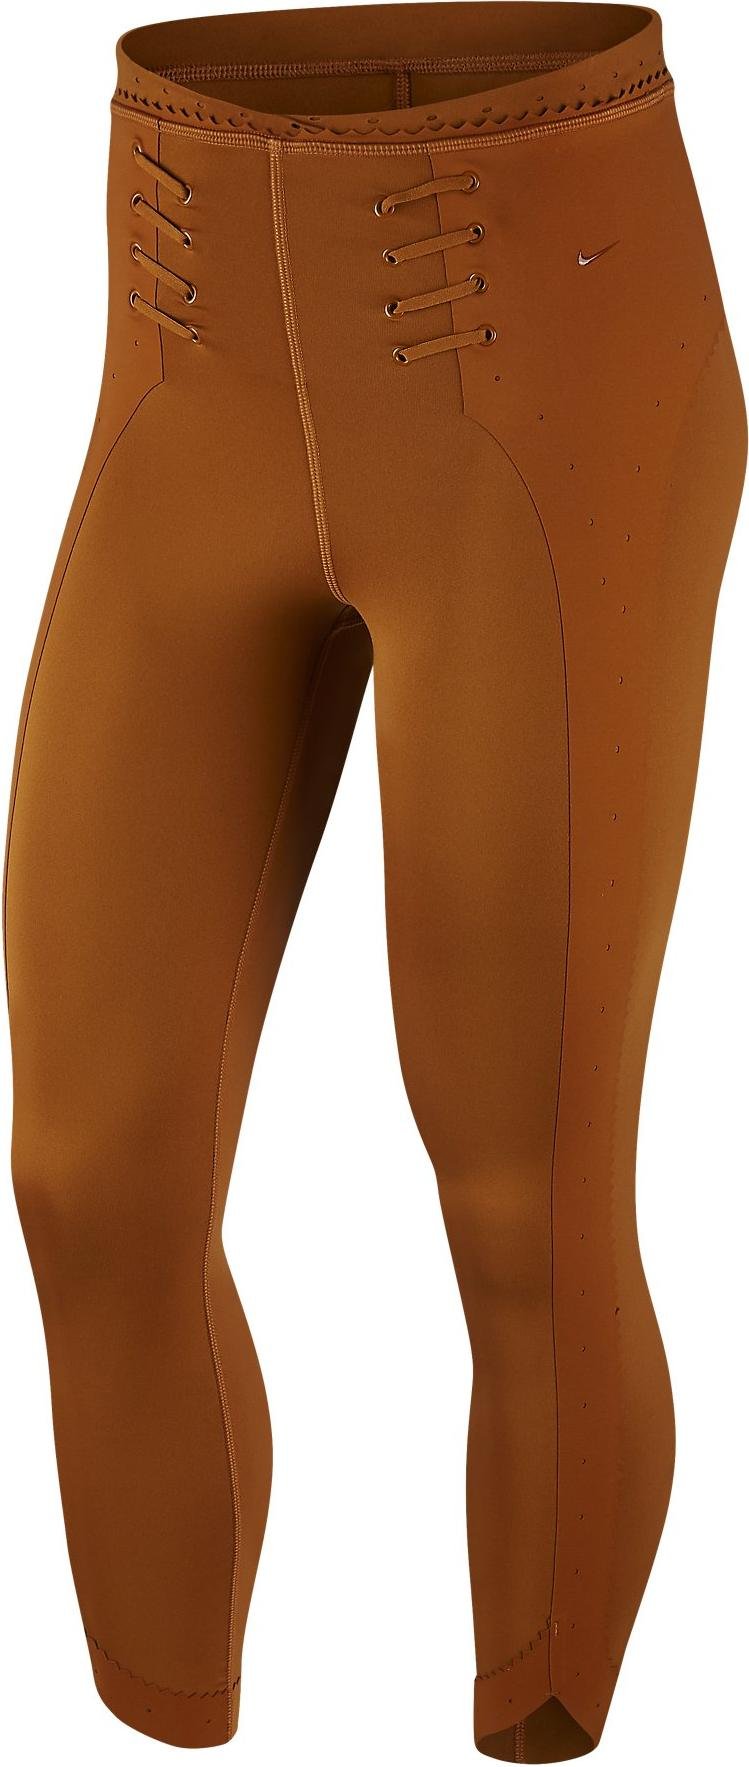 Nike W NK BOUTIQUE TIGHT TOOLING Leggings